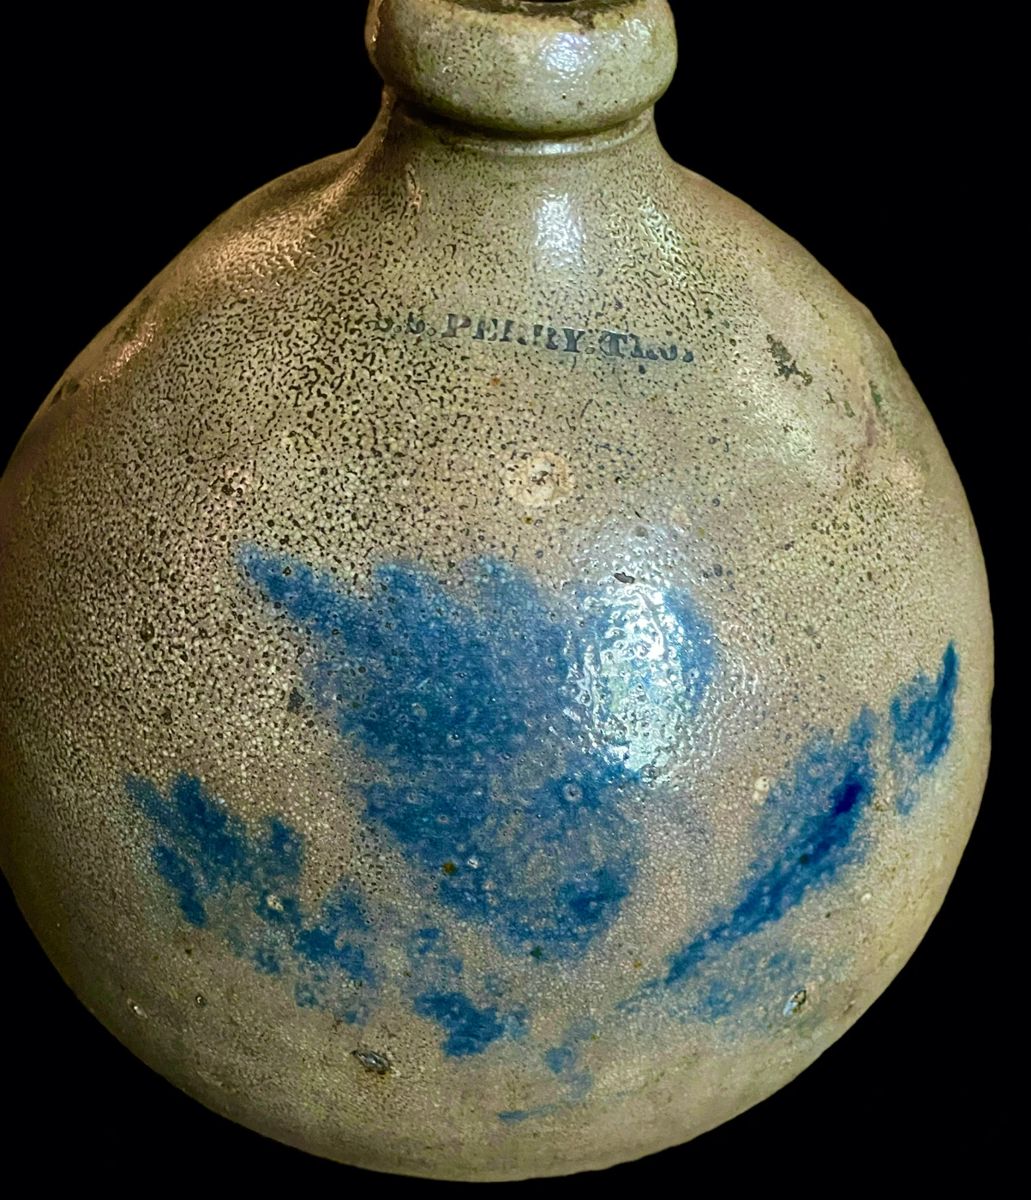 Scarce Cobalt-Decorated Stoneware Jug, Stamped S.S. PERRY / TROY New York State origin, circa 1828-1833